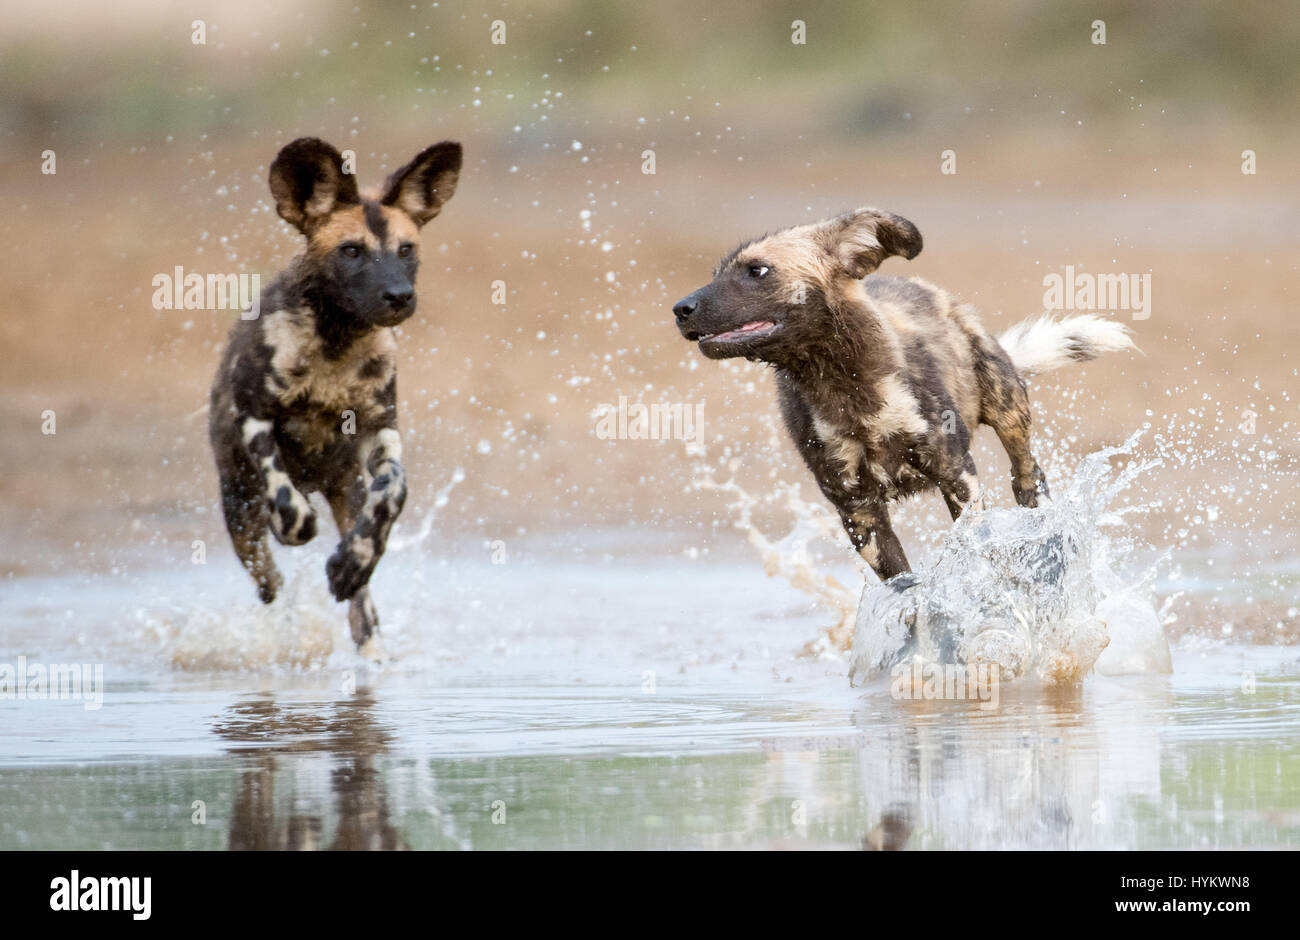 ZIMANGA PRIVATE GAME RESERVE, SOUTH AFRICA: THE WILD puppy dogs of Africa have been snapped in a dramatic take down of an adult Nyala bull. Pictures show wilddog pups enjoying a carefree frolic in the cool water of an African game reserve after a group attack on an unsuspecting antelope provided a hearty lunch.  The predatory party included seven adults as well as twelve pups. Stock Photo